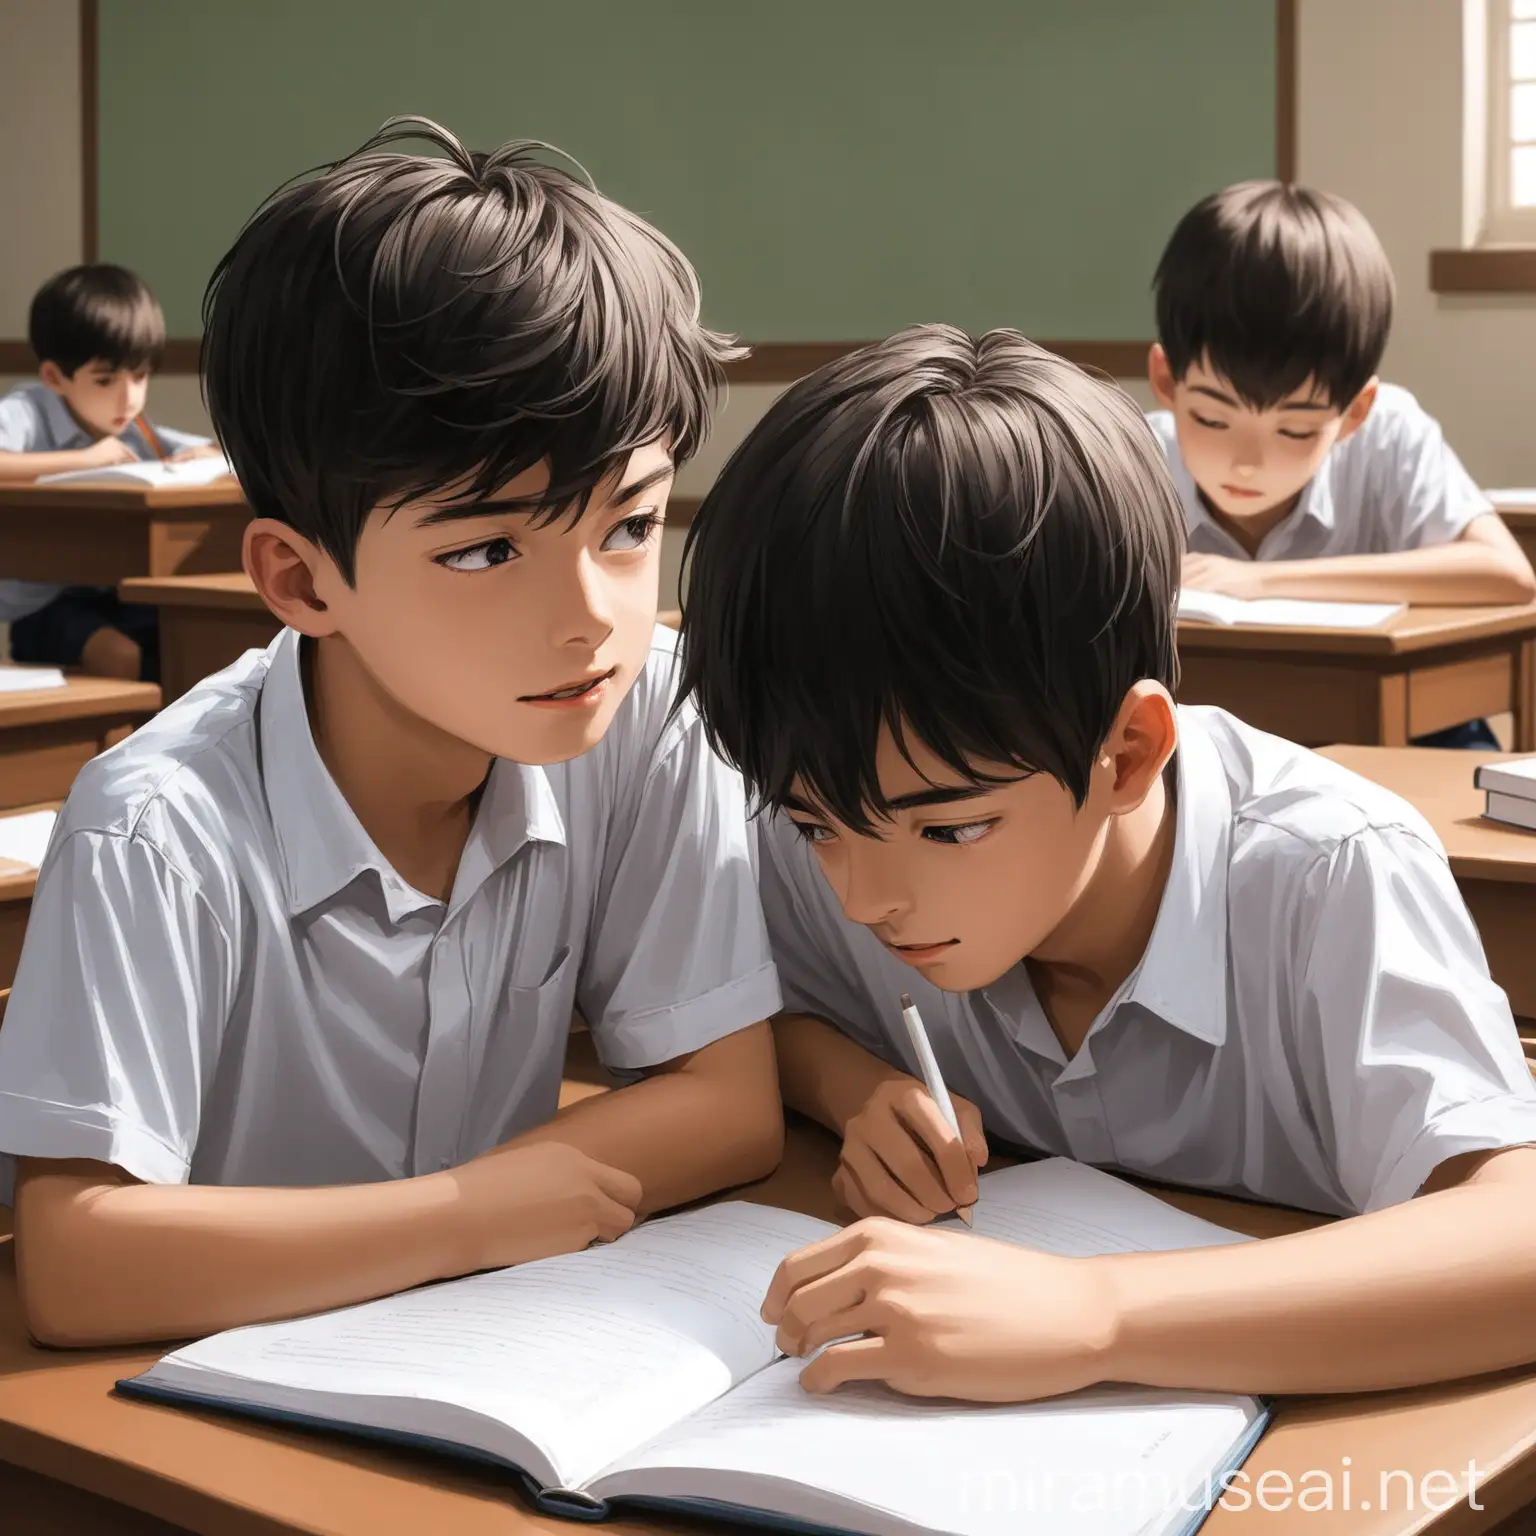 Group of Boys Studying Together in a Bright Classroom Setting